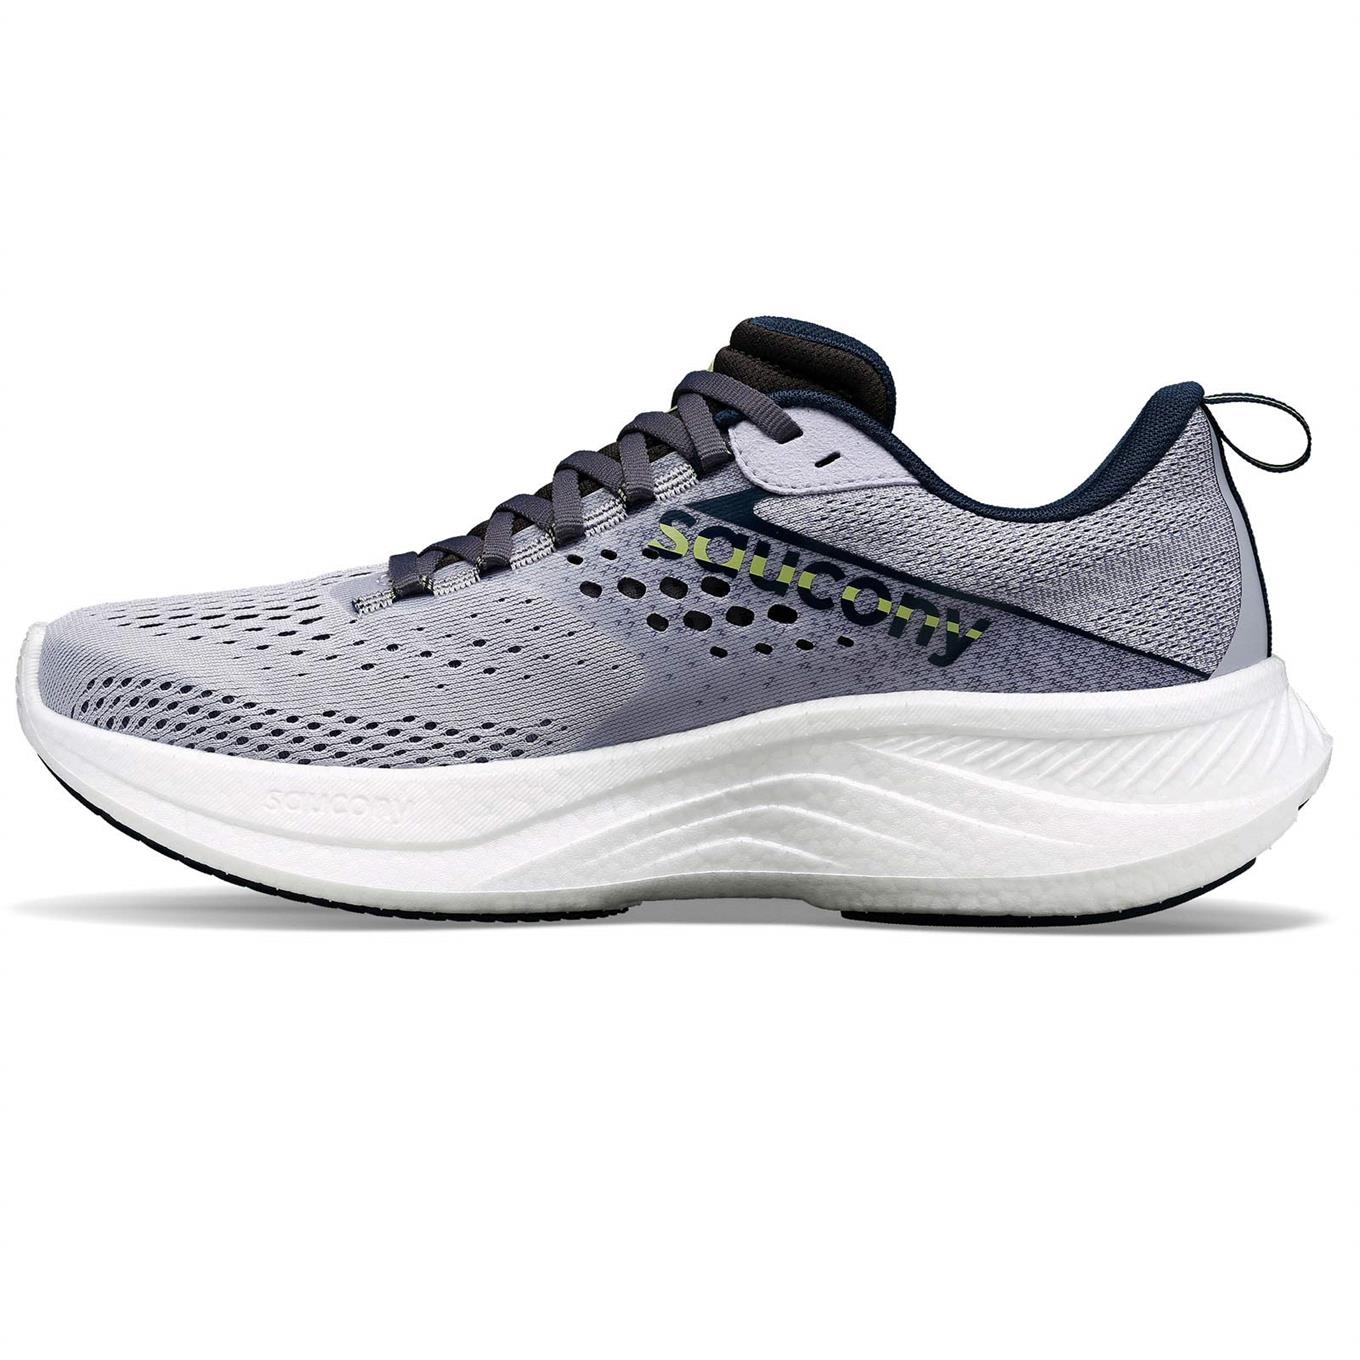 SAUCONY RIDE 17 WOMENS RUNNING SHOES